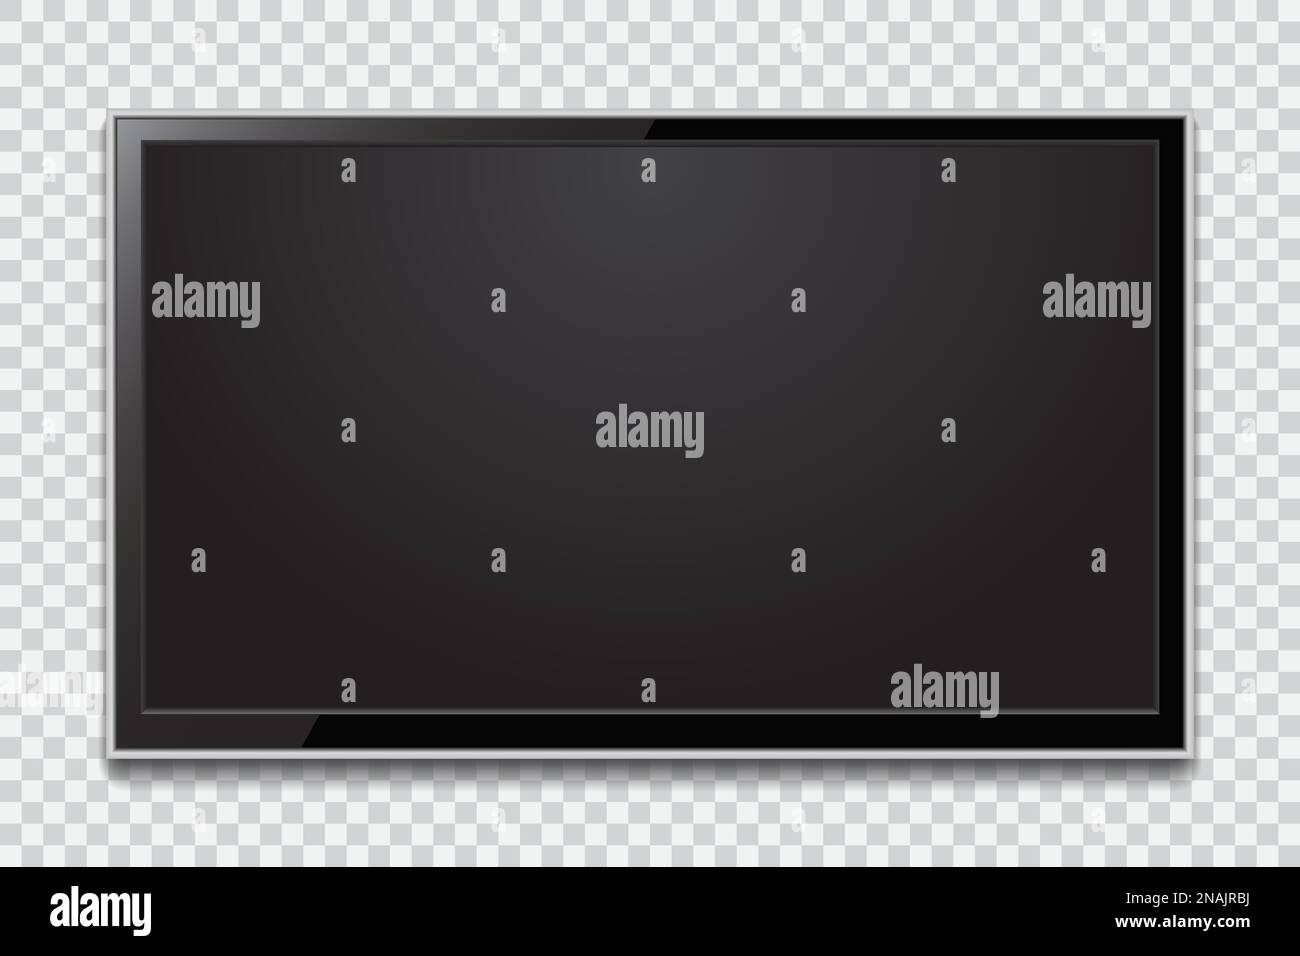 Realistic TV screen. Modern stylish lcd panel, led type. Large computer monitor display mockup. Blank television template. Stock Vector